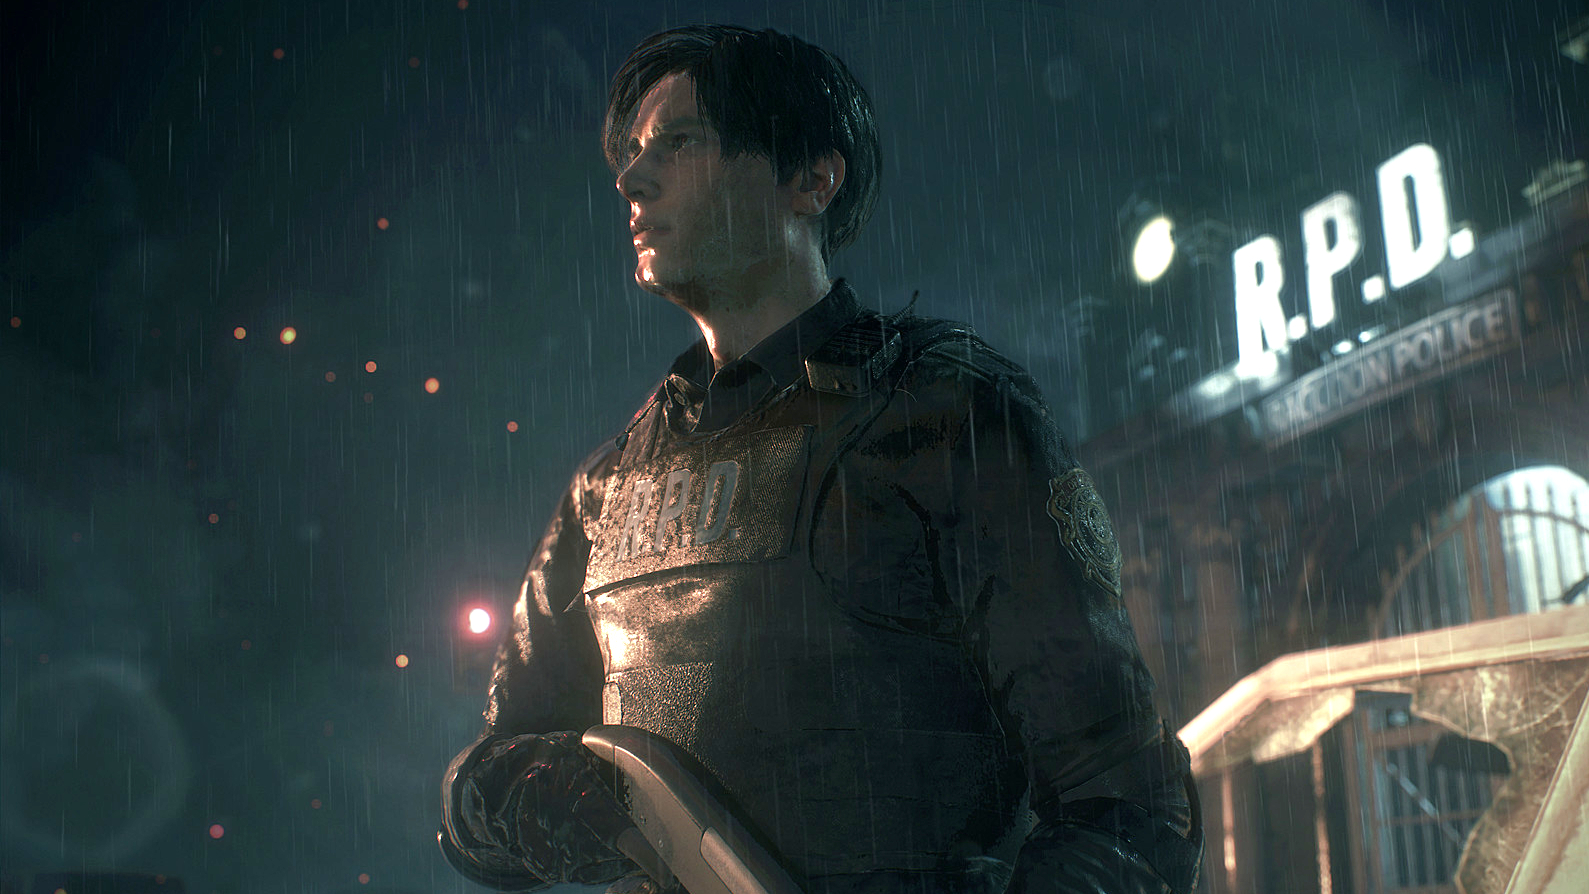 Leon Kennedy standing in the rain in Resident Evil 2 remake